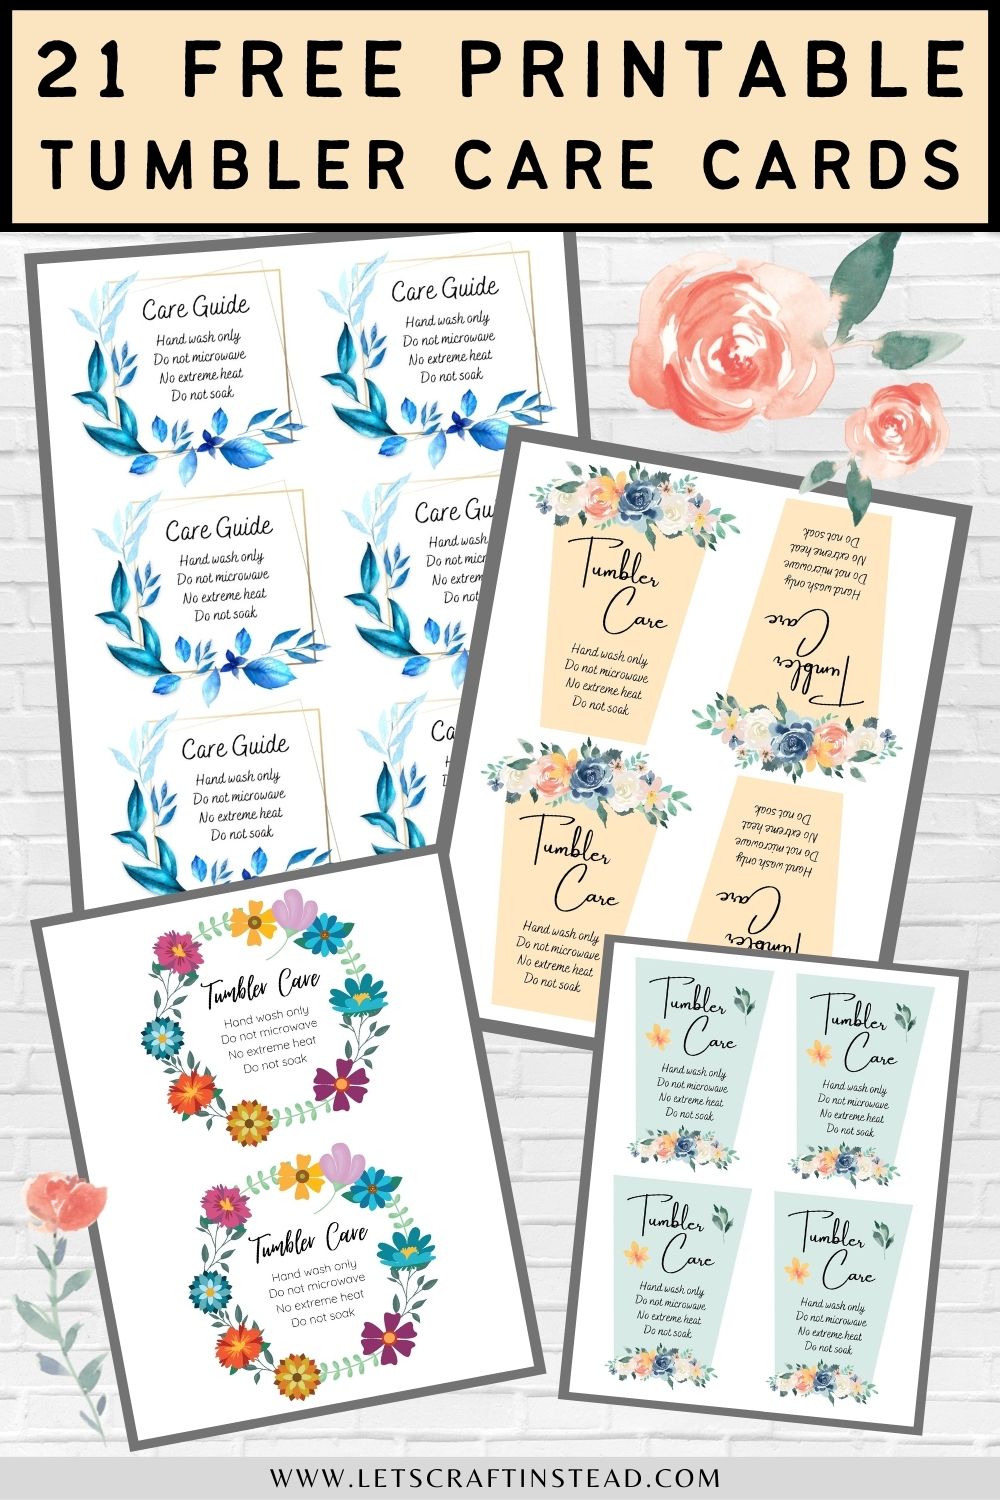 Care instruction free printable tumbler care cards